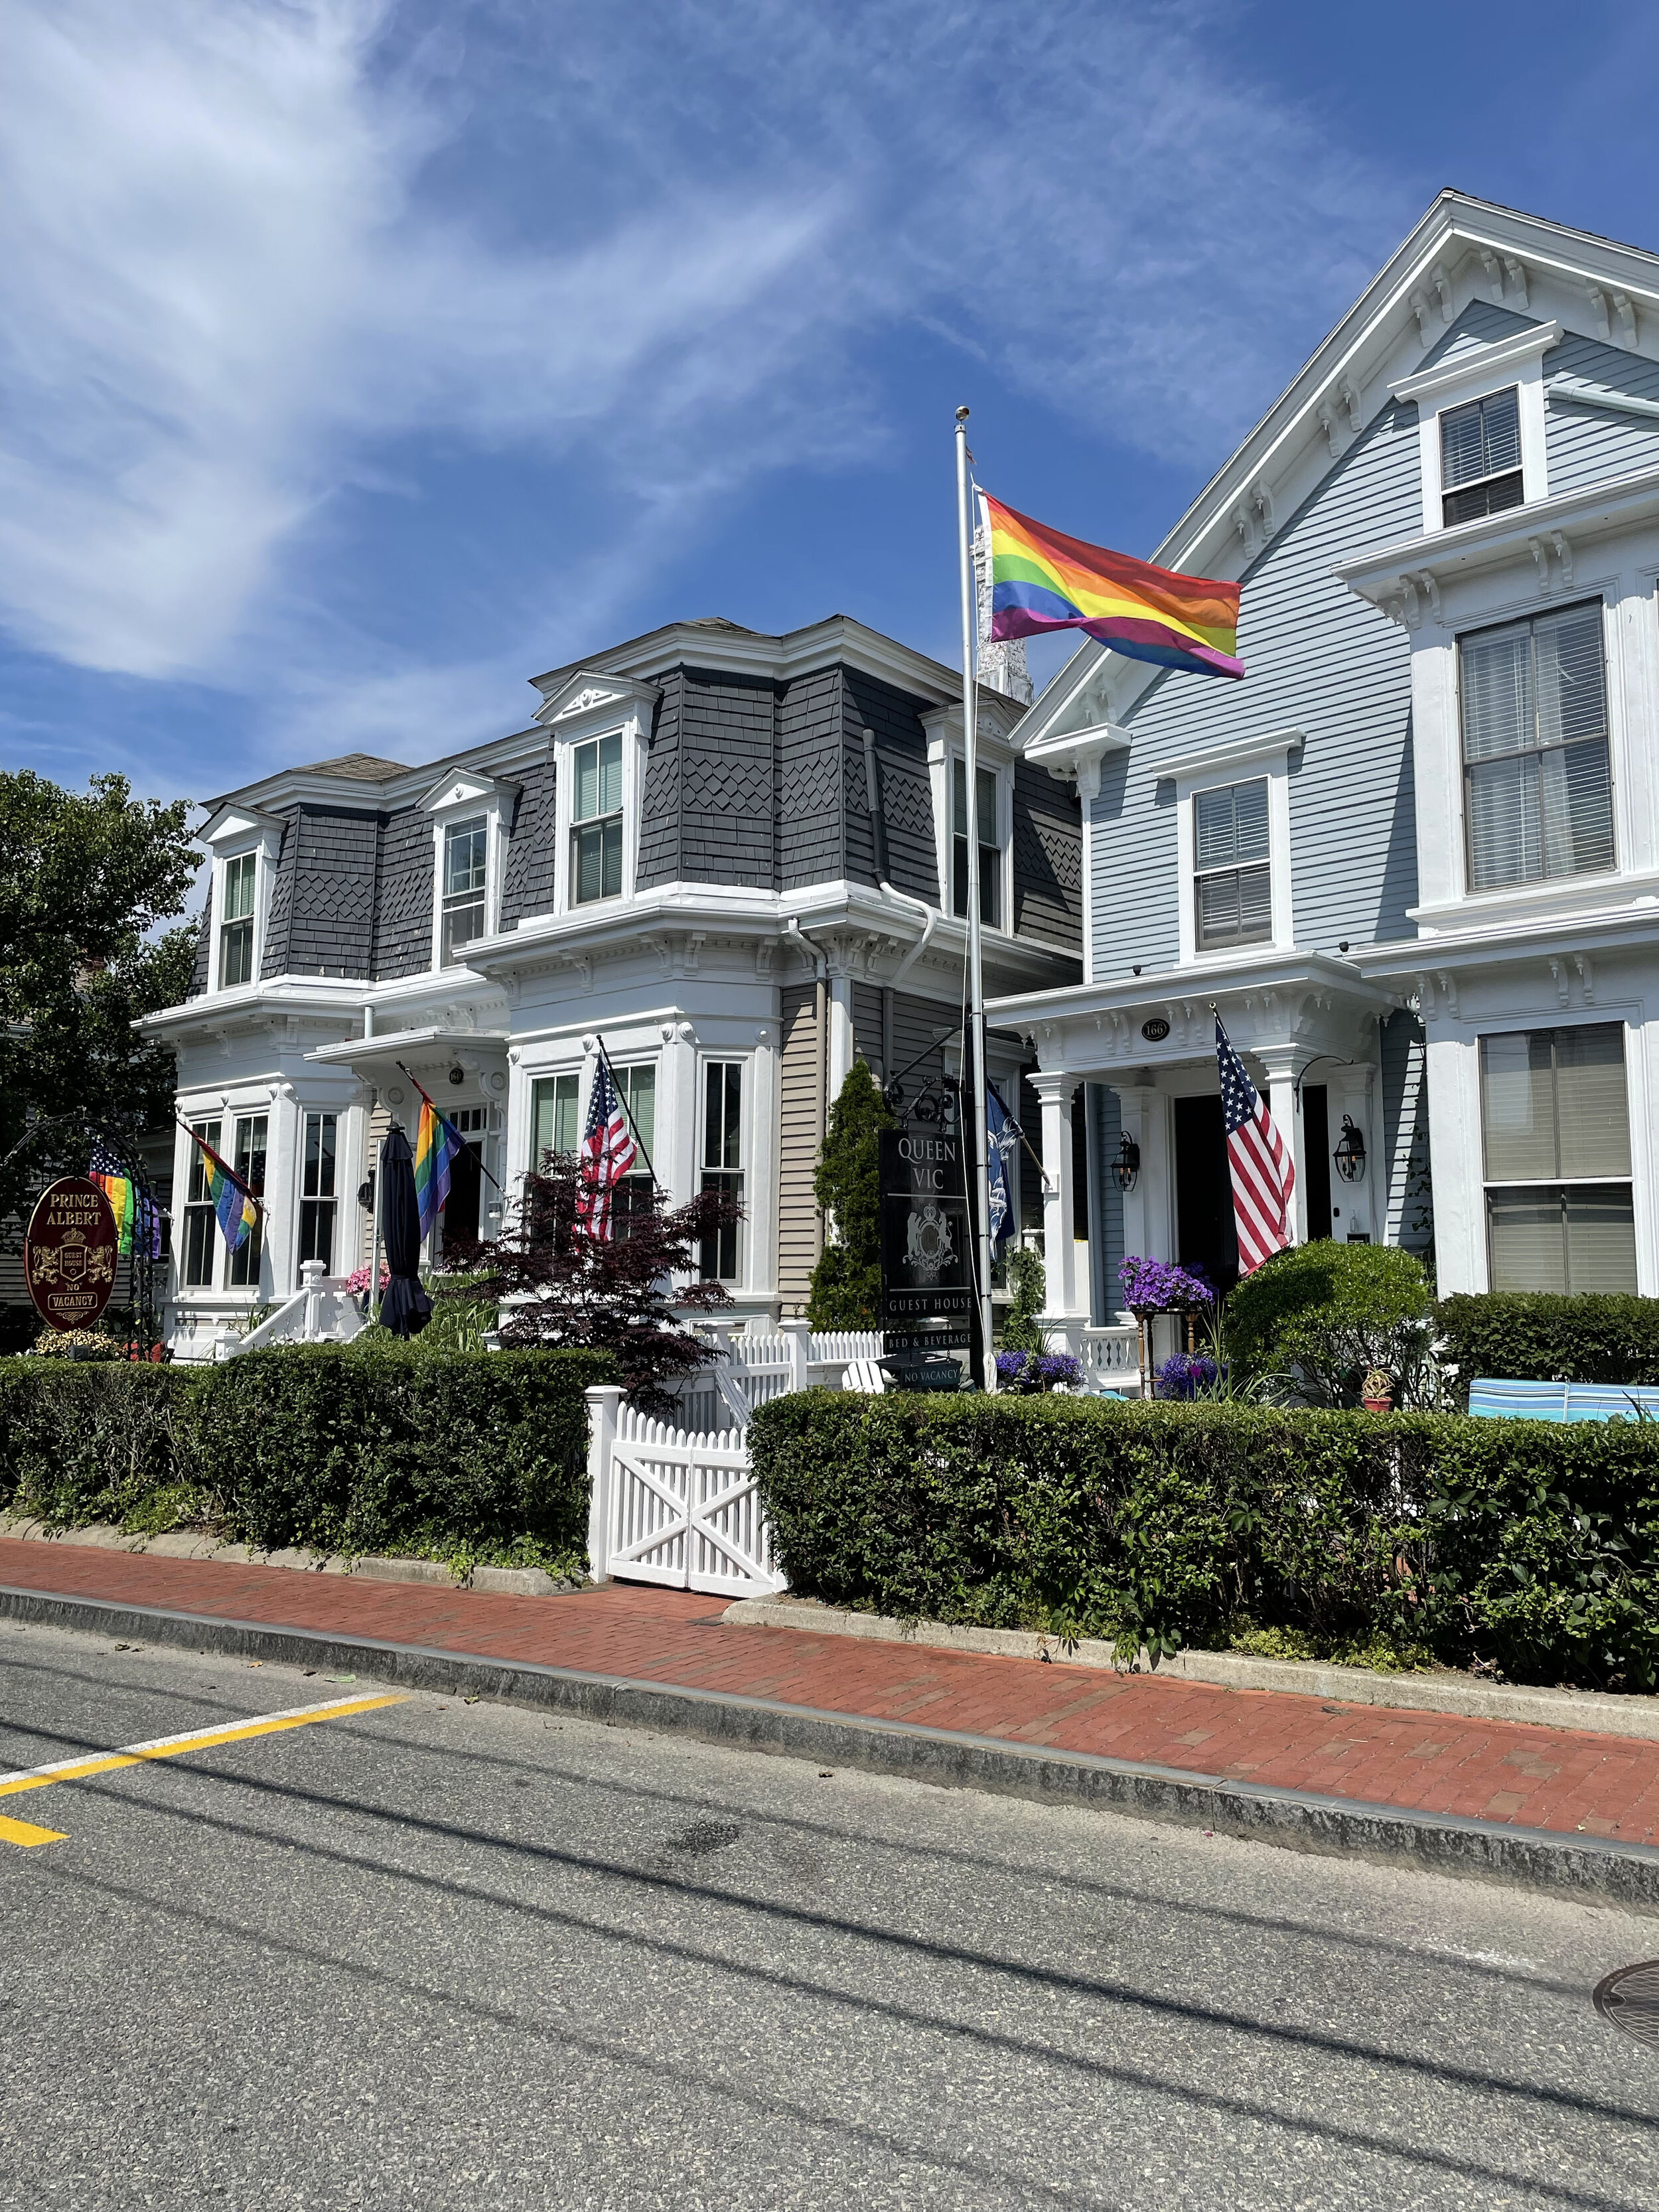 PROVINCETOWN CAPE COD SUMMER TRAVEL GUIDE